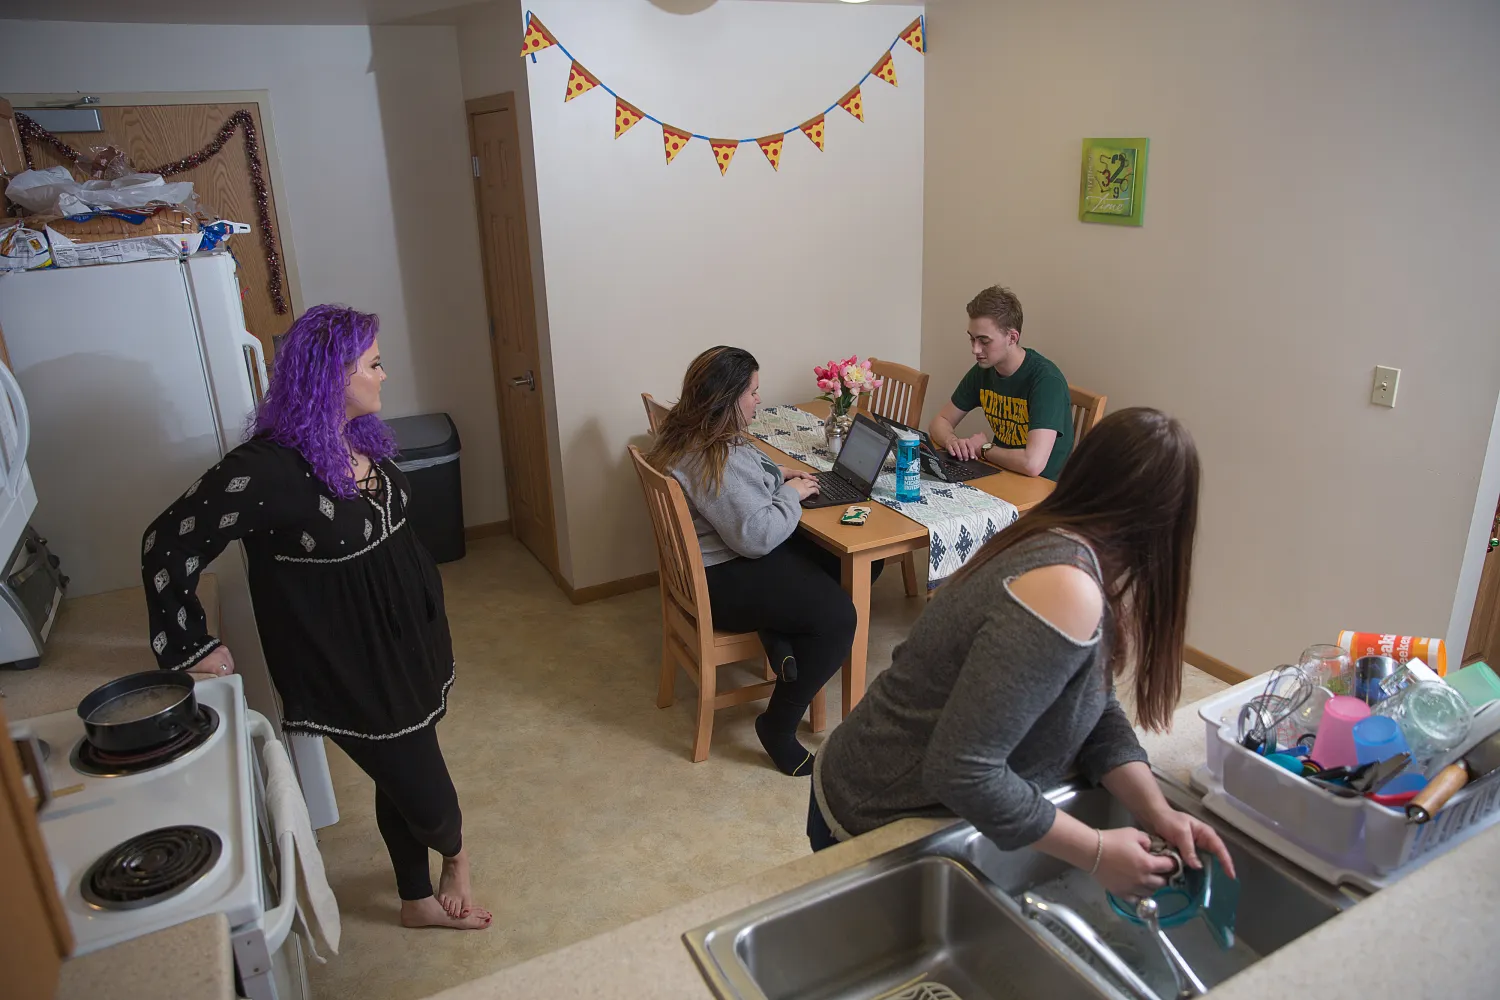 Students hanging out in a Woodland apartment